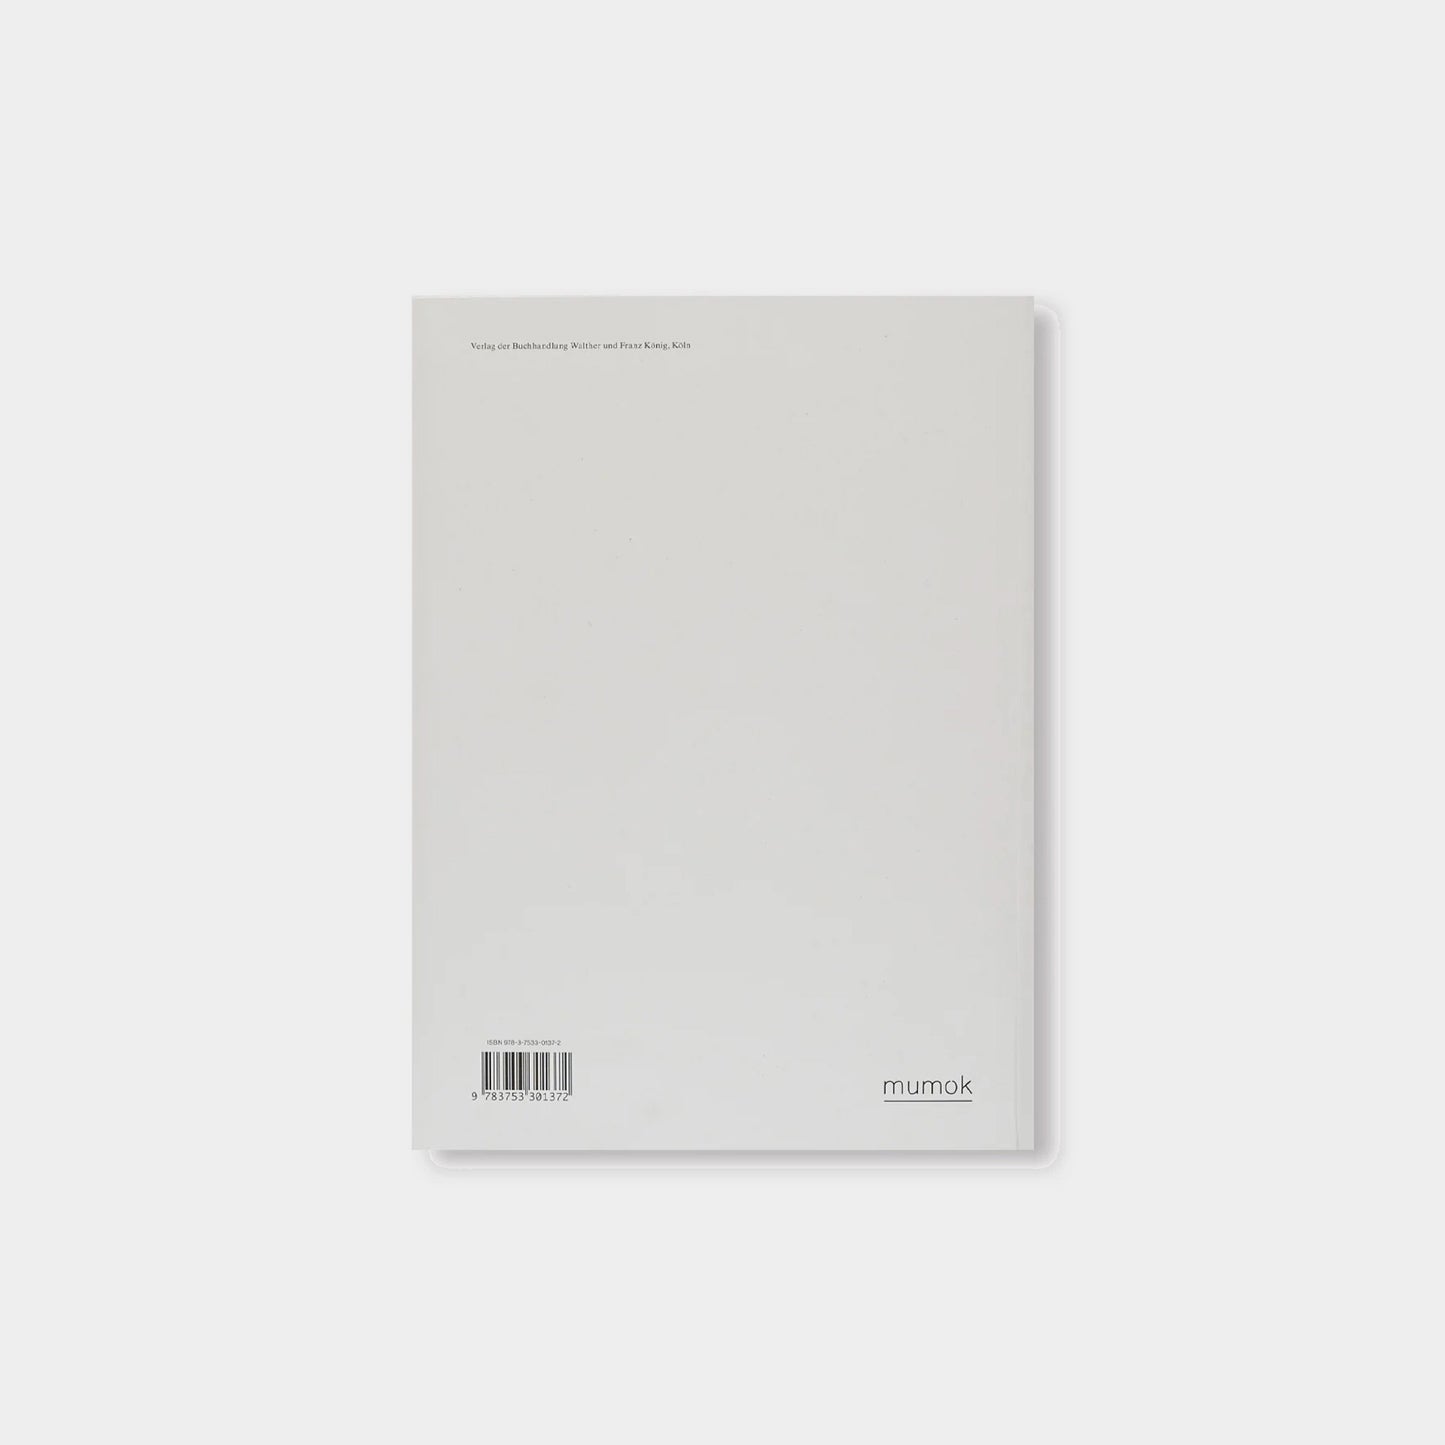 SOUND IS LIQUID by Wolfgang Tillmans